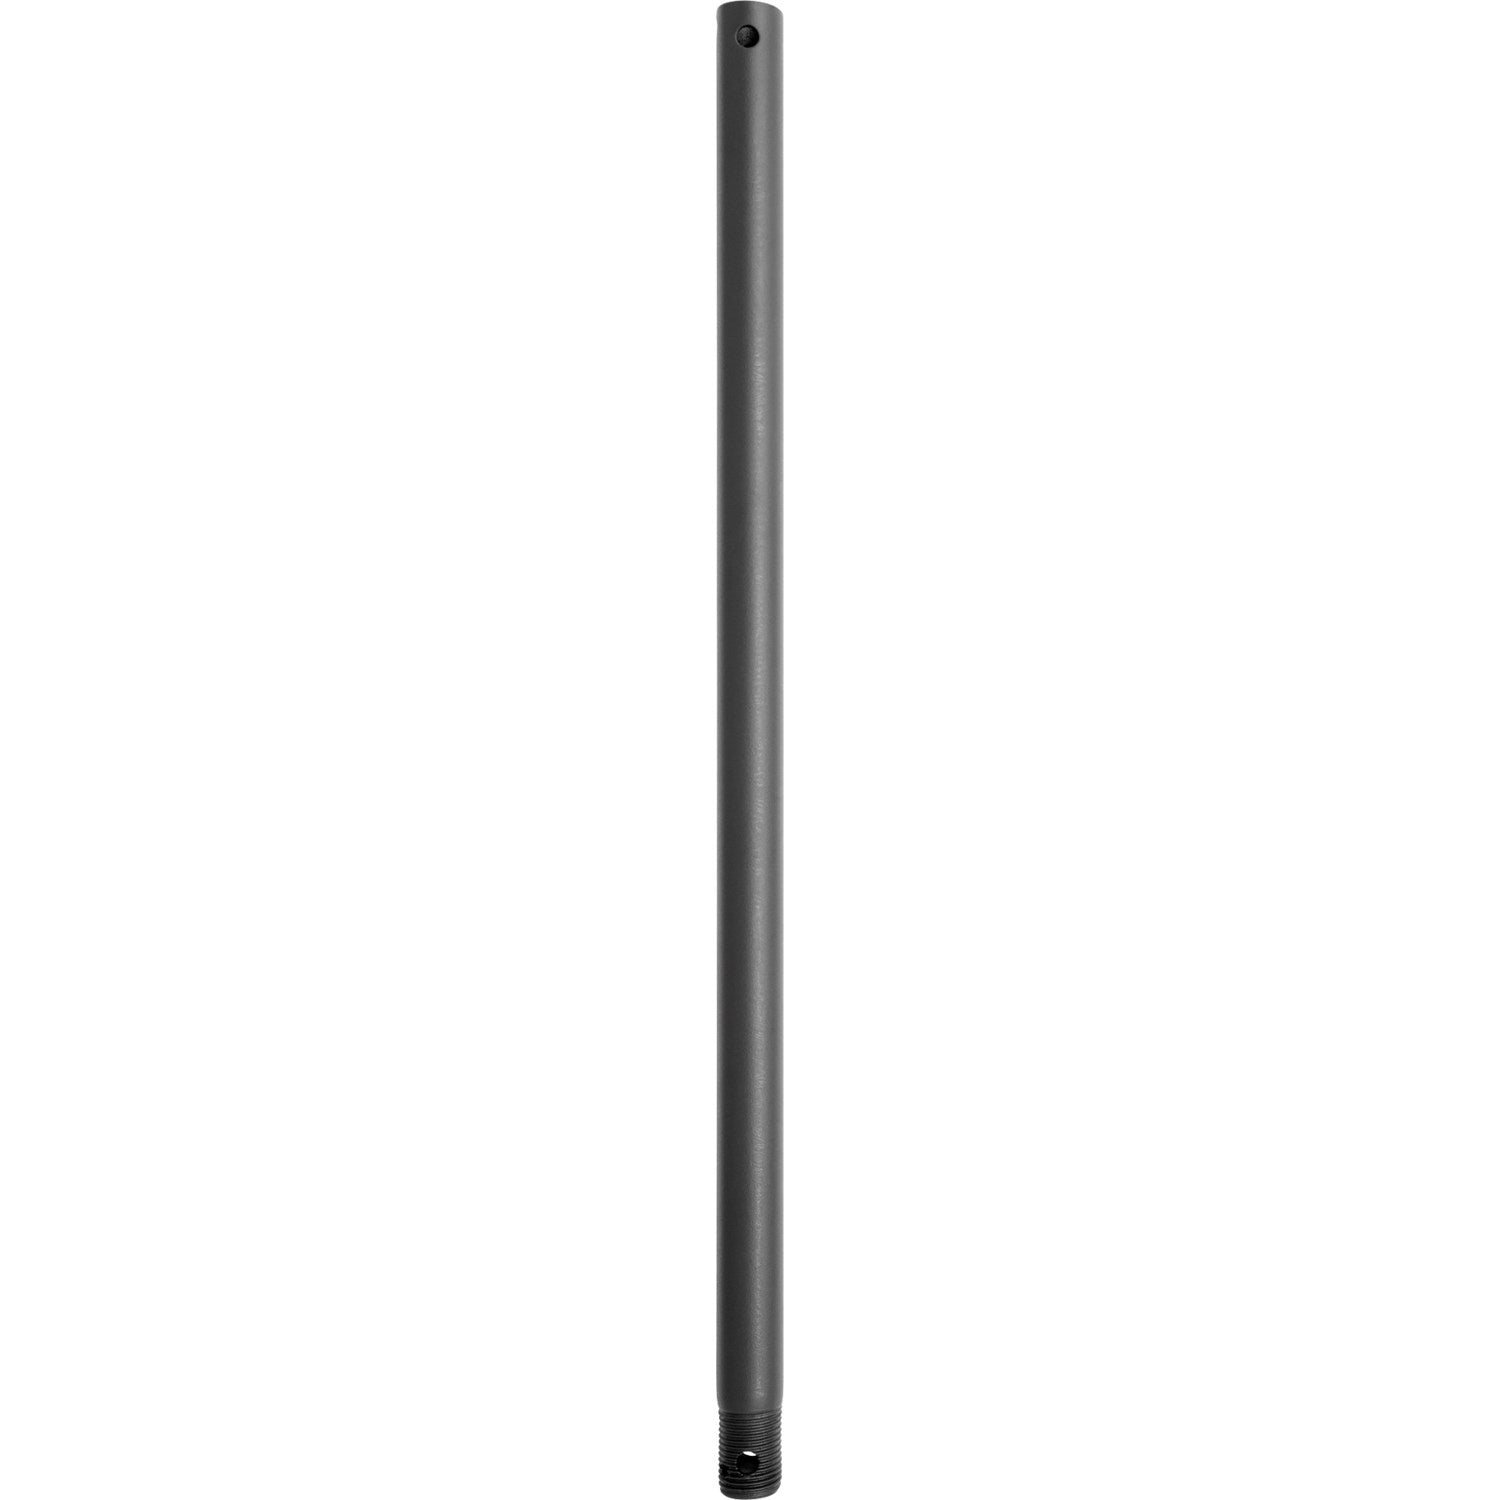 Quorum - 6-1869 - Downrod - 18 in. Downrods - Textured Black